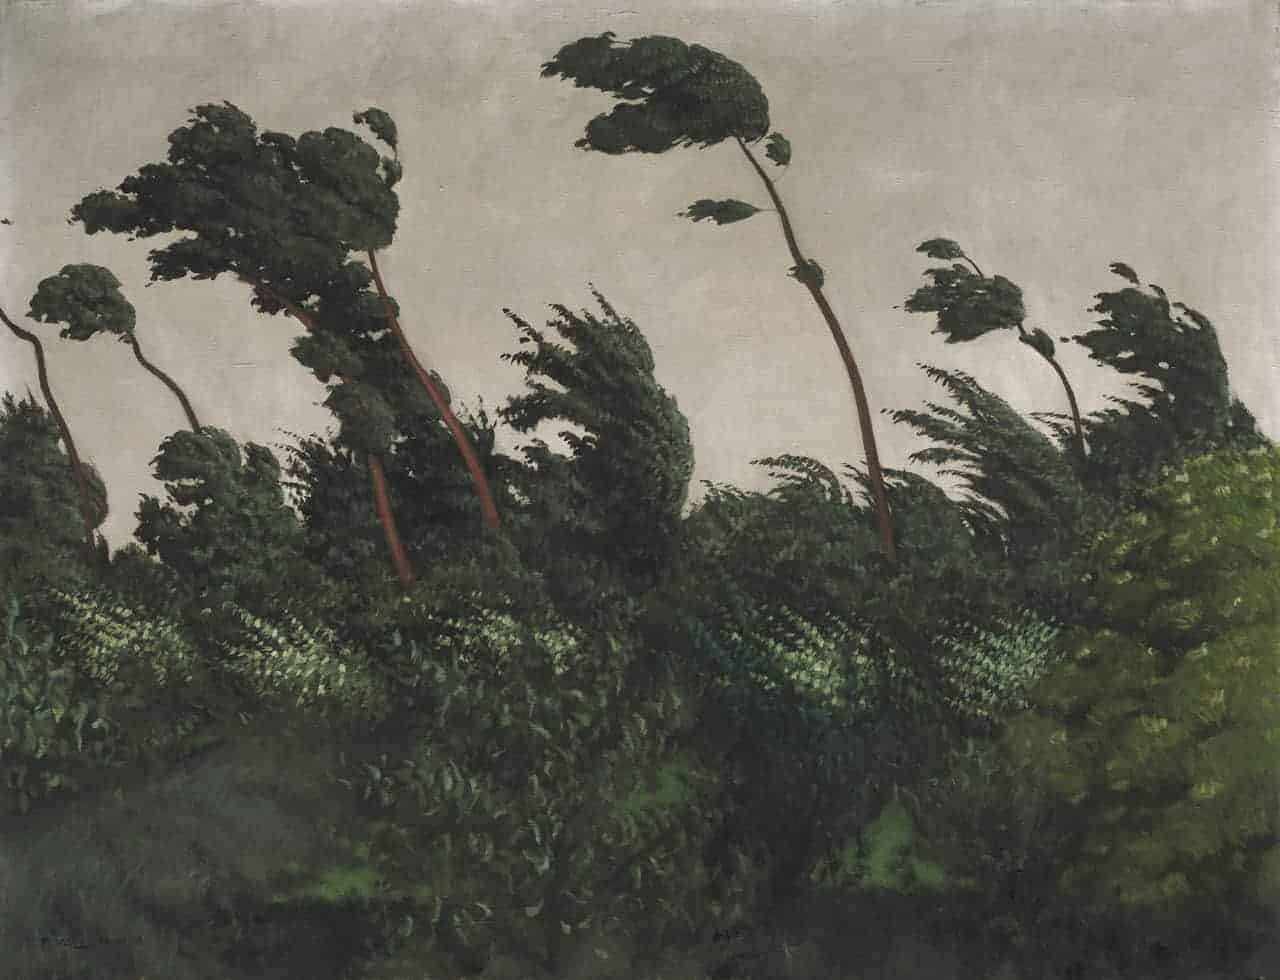 Image of a painting of a windy road with complex landscape